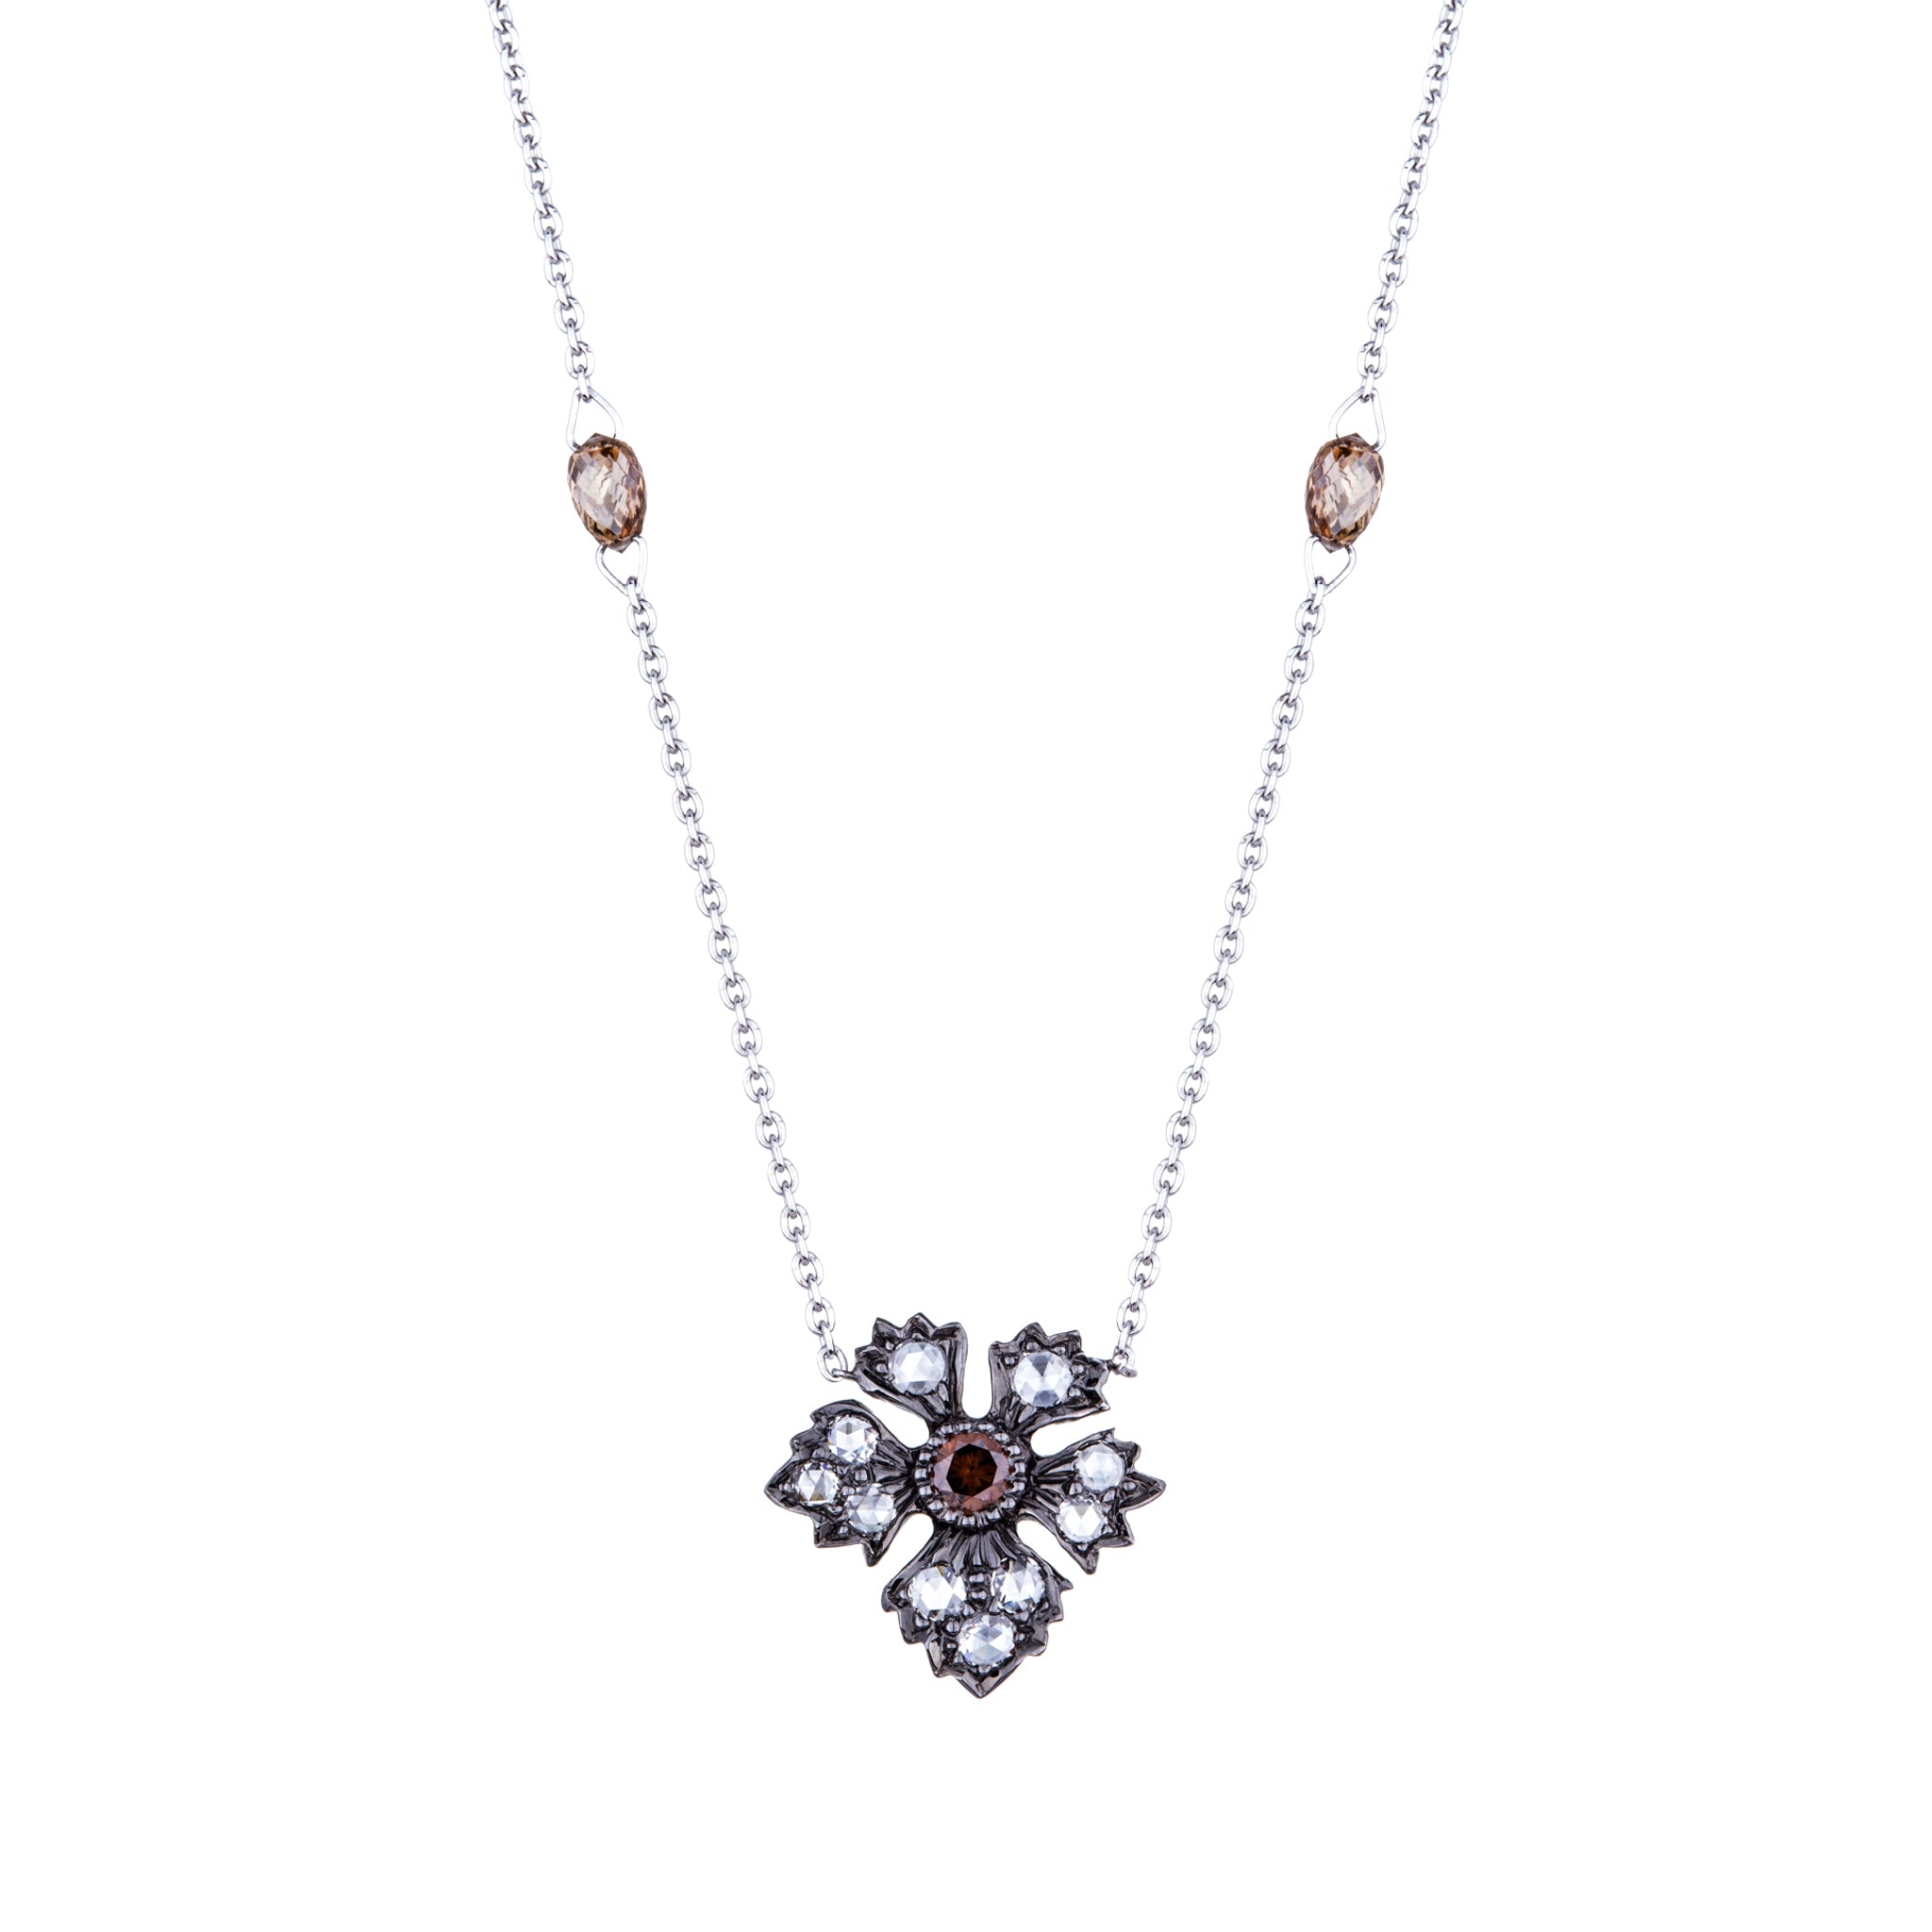 Enchanted Garden Champagne and Burnt Orange Diamond Station Necklace